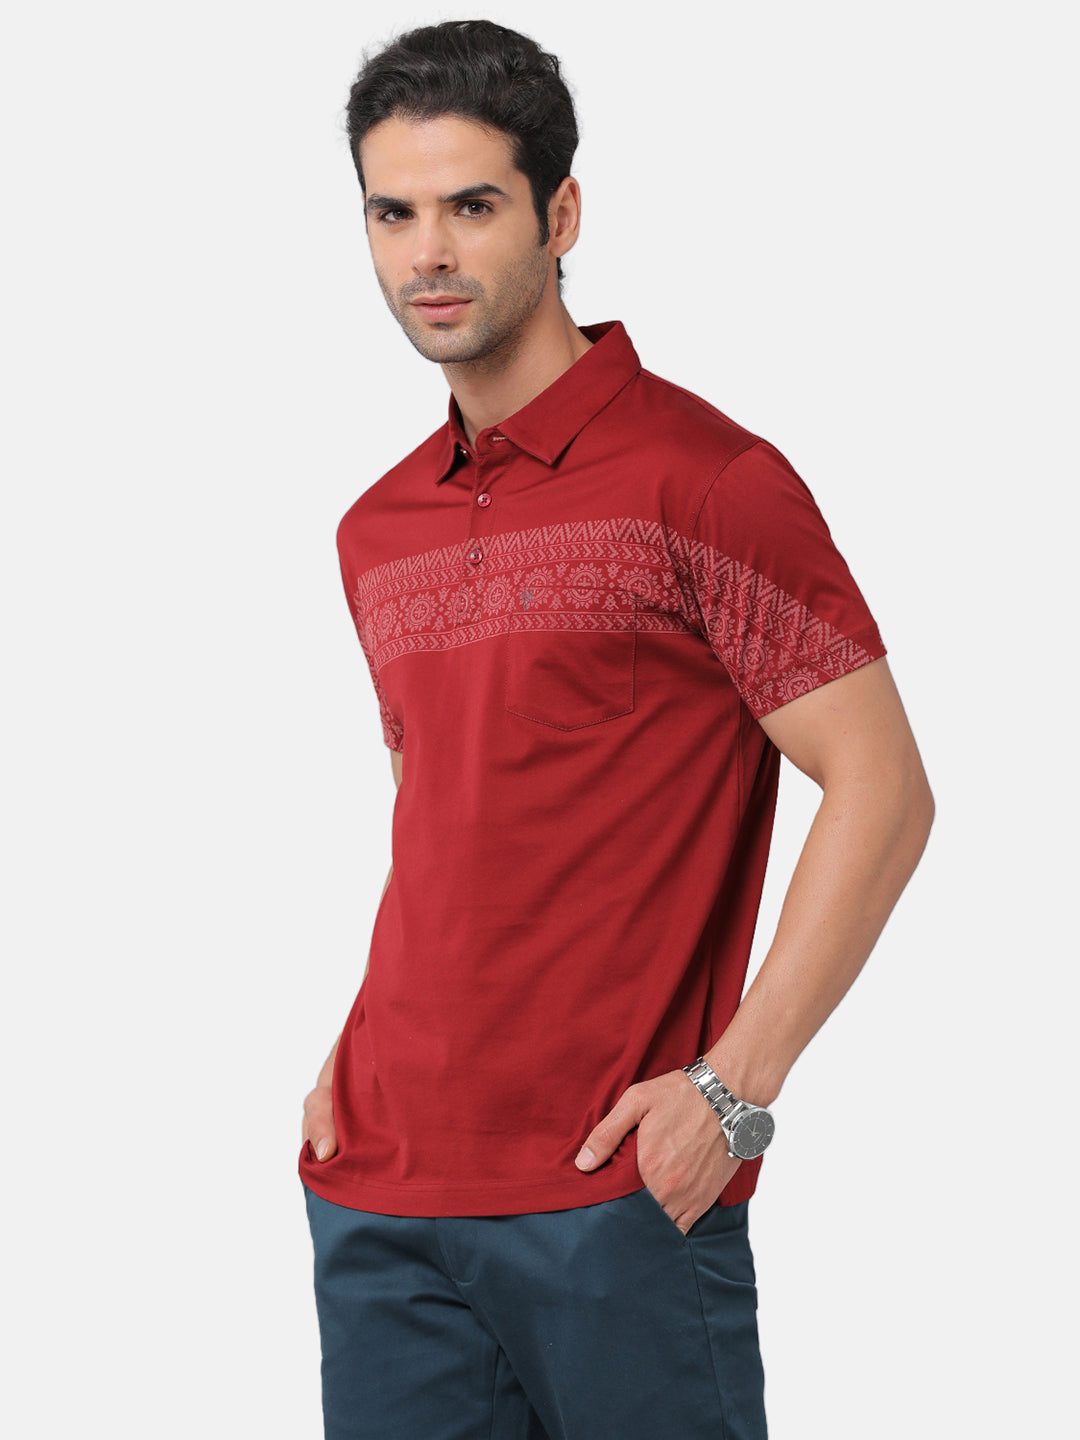 Classic Polo Mens Cotton Printed Slim Fit Polo Neck Red Color T-Shirt | Unico 17a